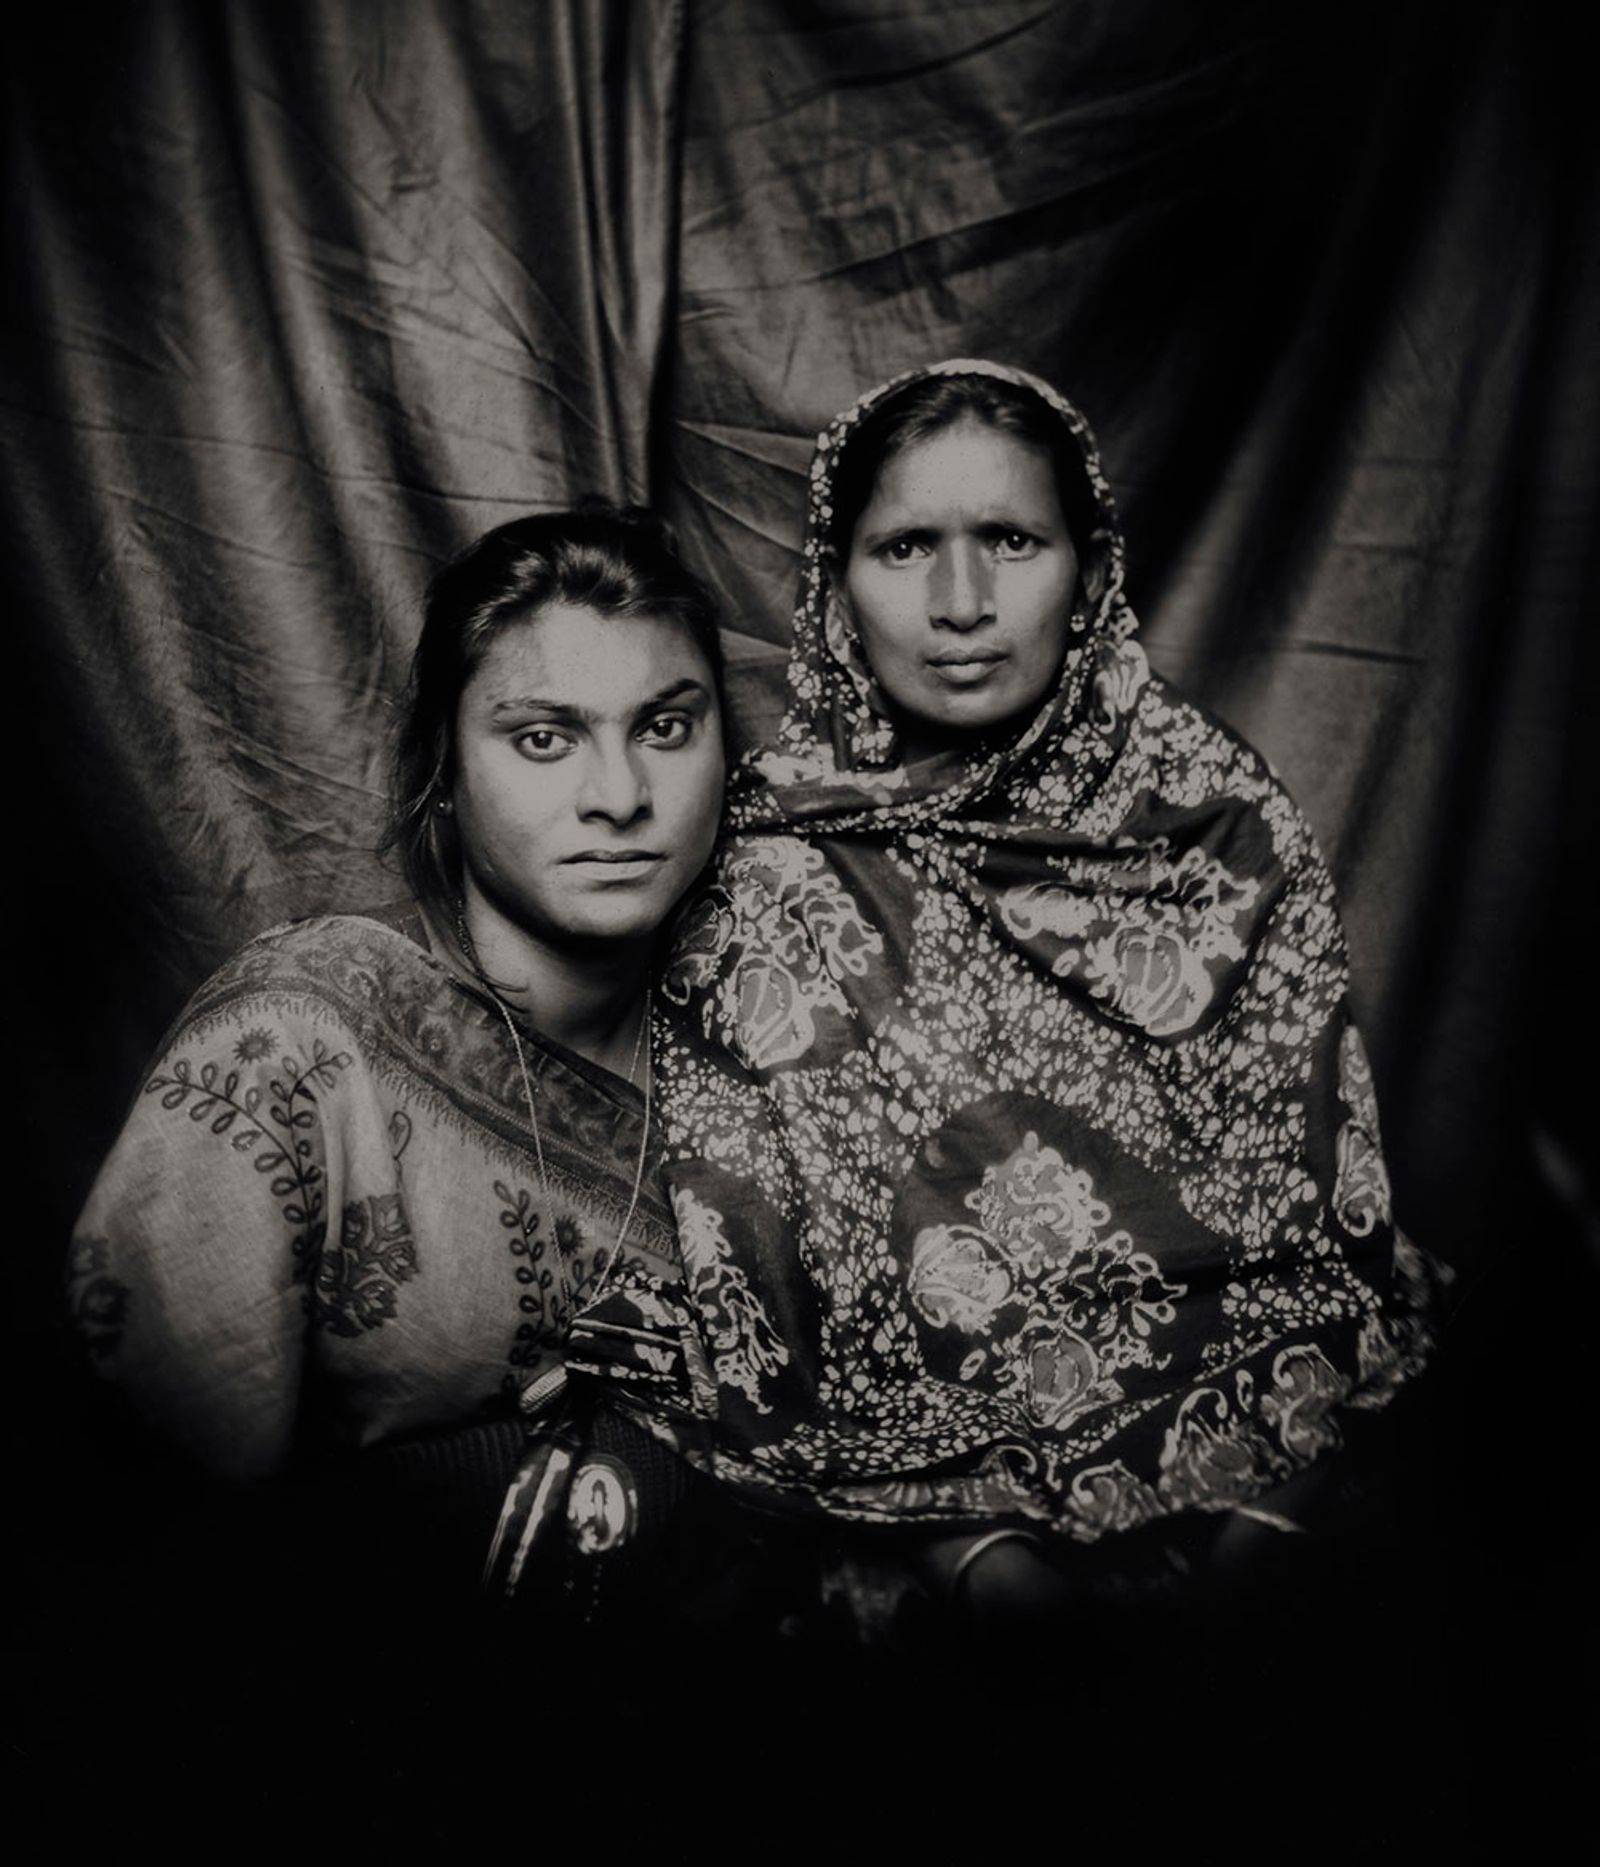 © Shahria Sharmin - Image from the Call Me Heena photography project